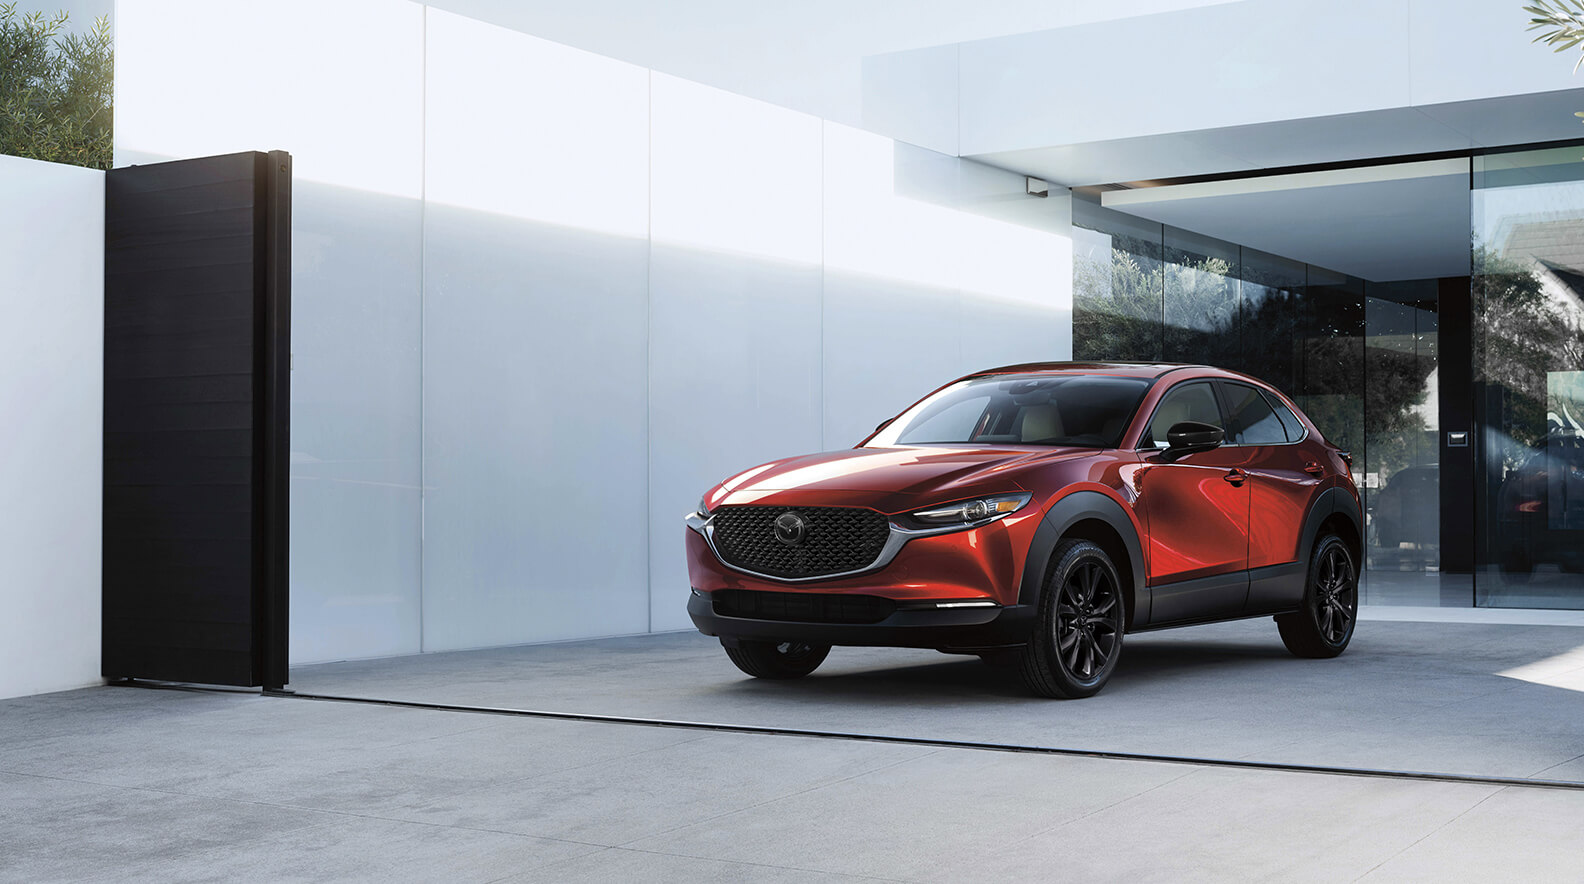 Mazda CX-30 Crossover SUV parked in modern driveway